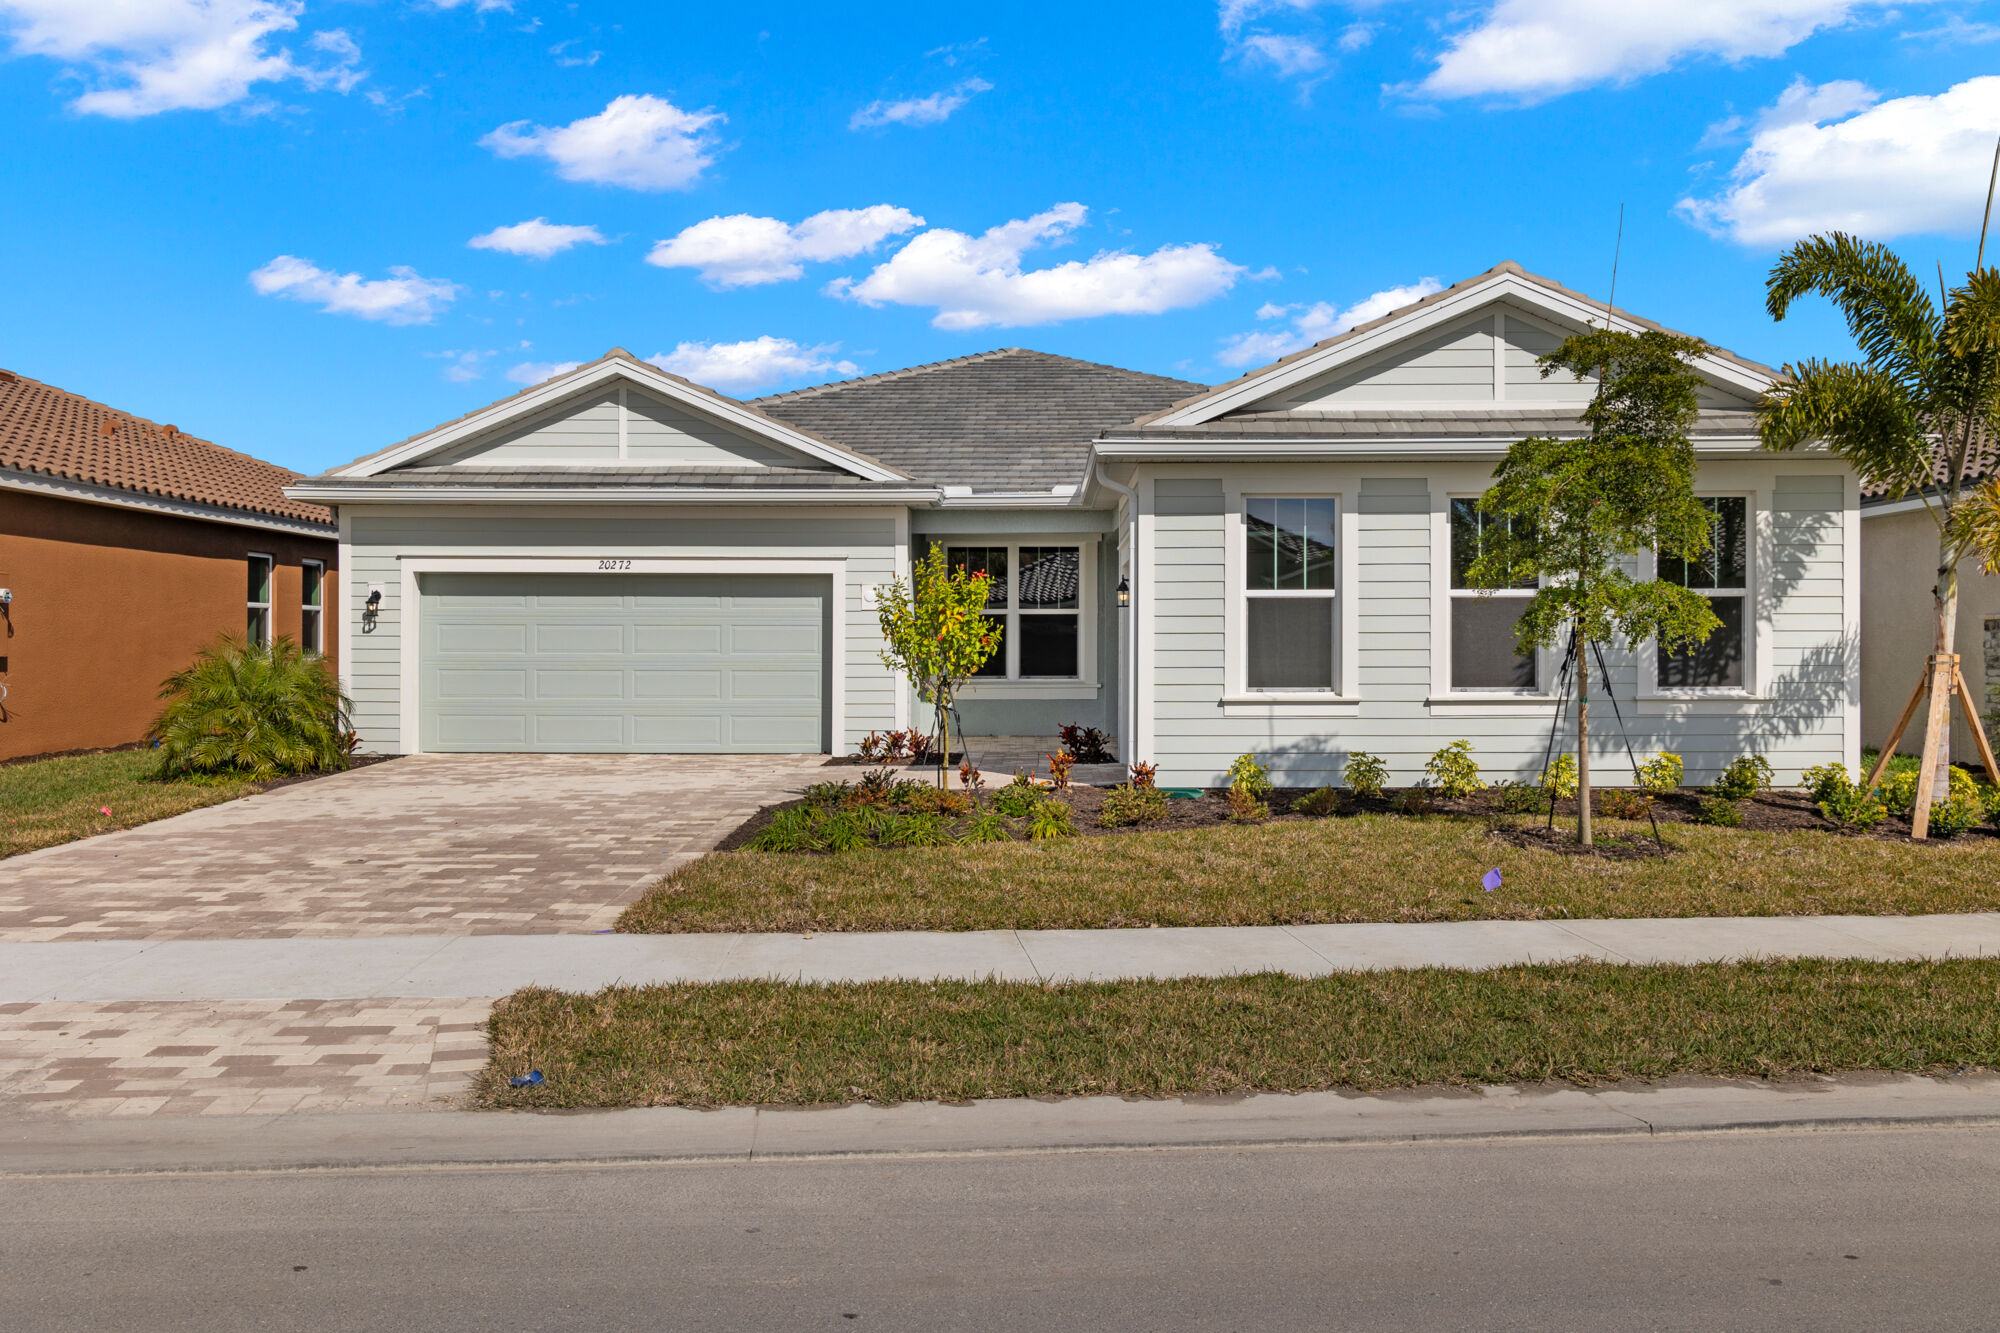 Water view lot, 3 bedroom, 2 bathroom, 3 car garage, Study, oversized owners shower, walk-in closet, breakfast bar on kitchen island, laundry room, walk-in pantry, front porch, open dining and Great Room, double 12' sliders, long covered lanai, 